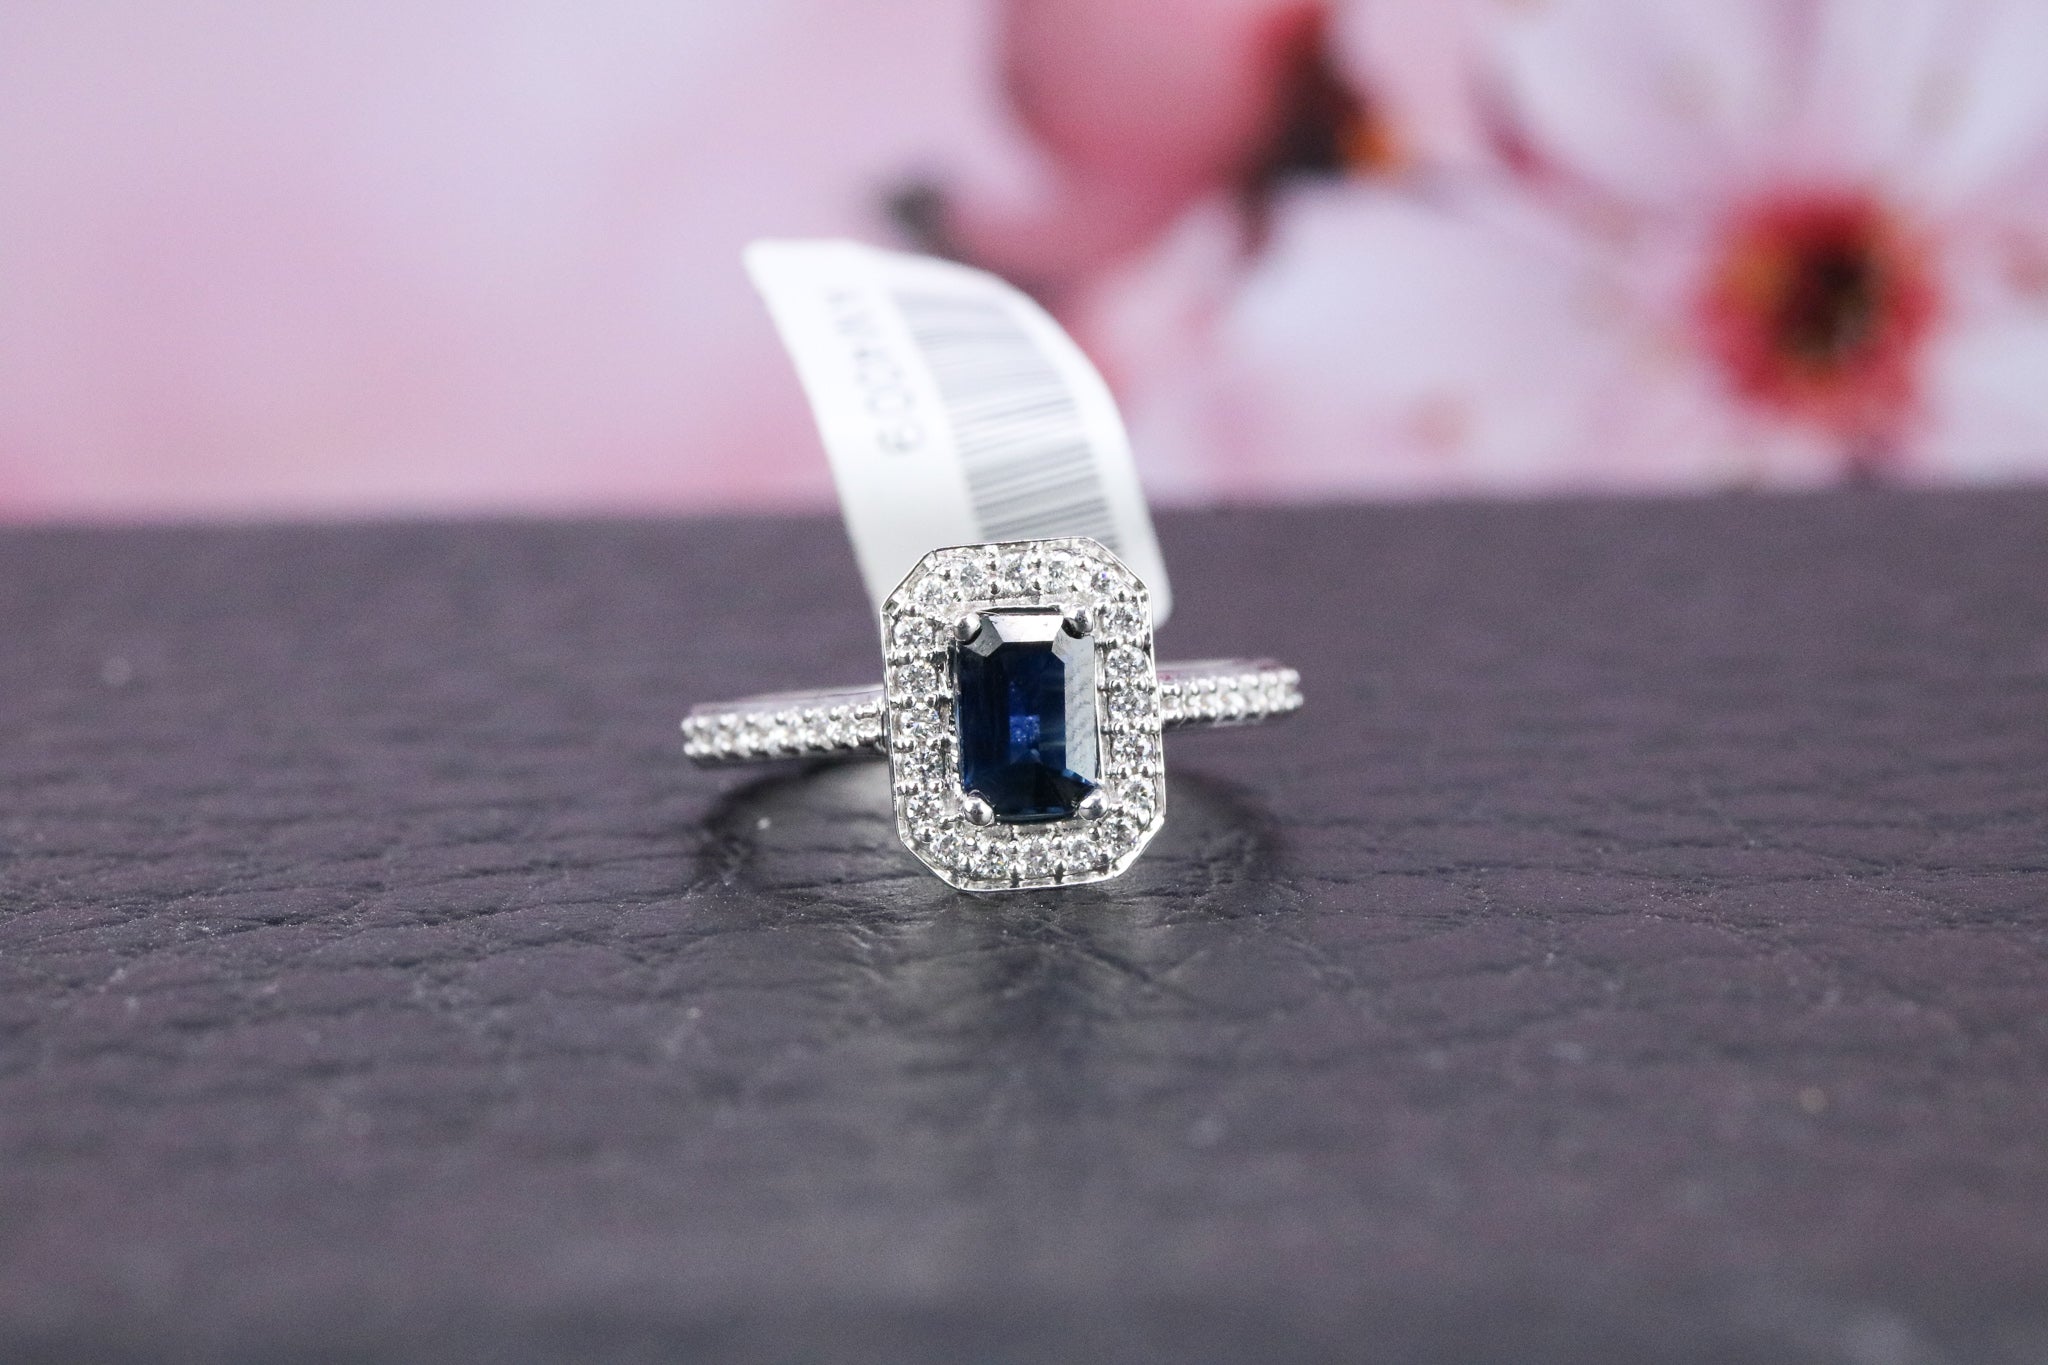 9ct White Gold Sapphire & Diamond Ring - AM4009 - Hallmark Jewellers Formby & The Jewellers Bench Widnes